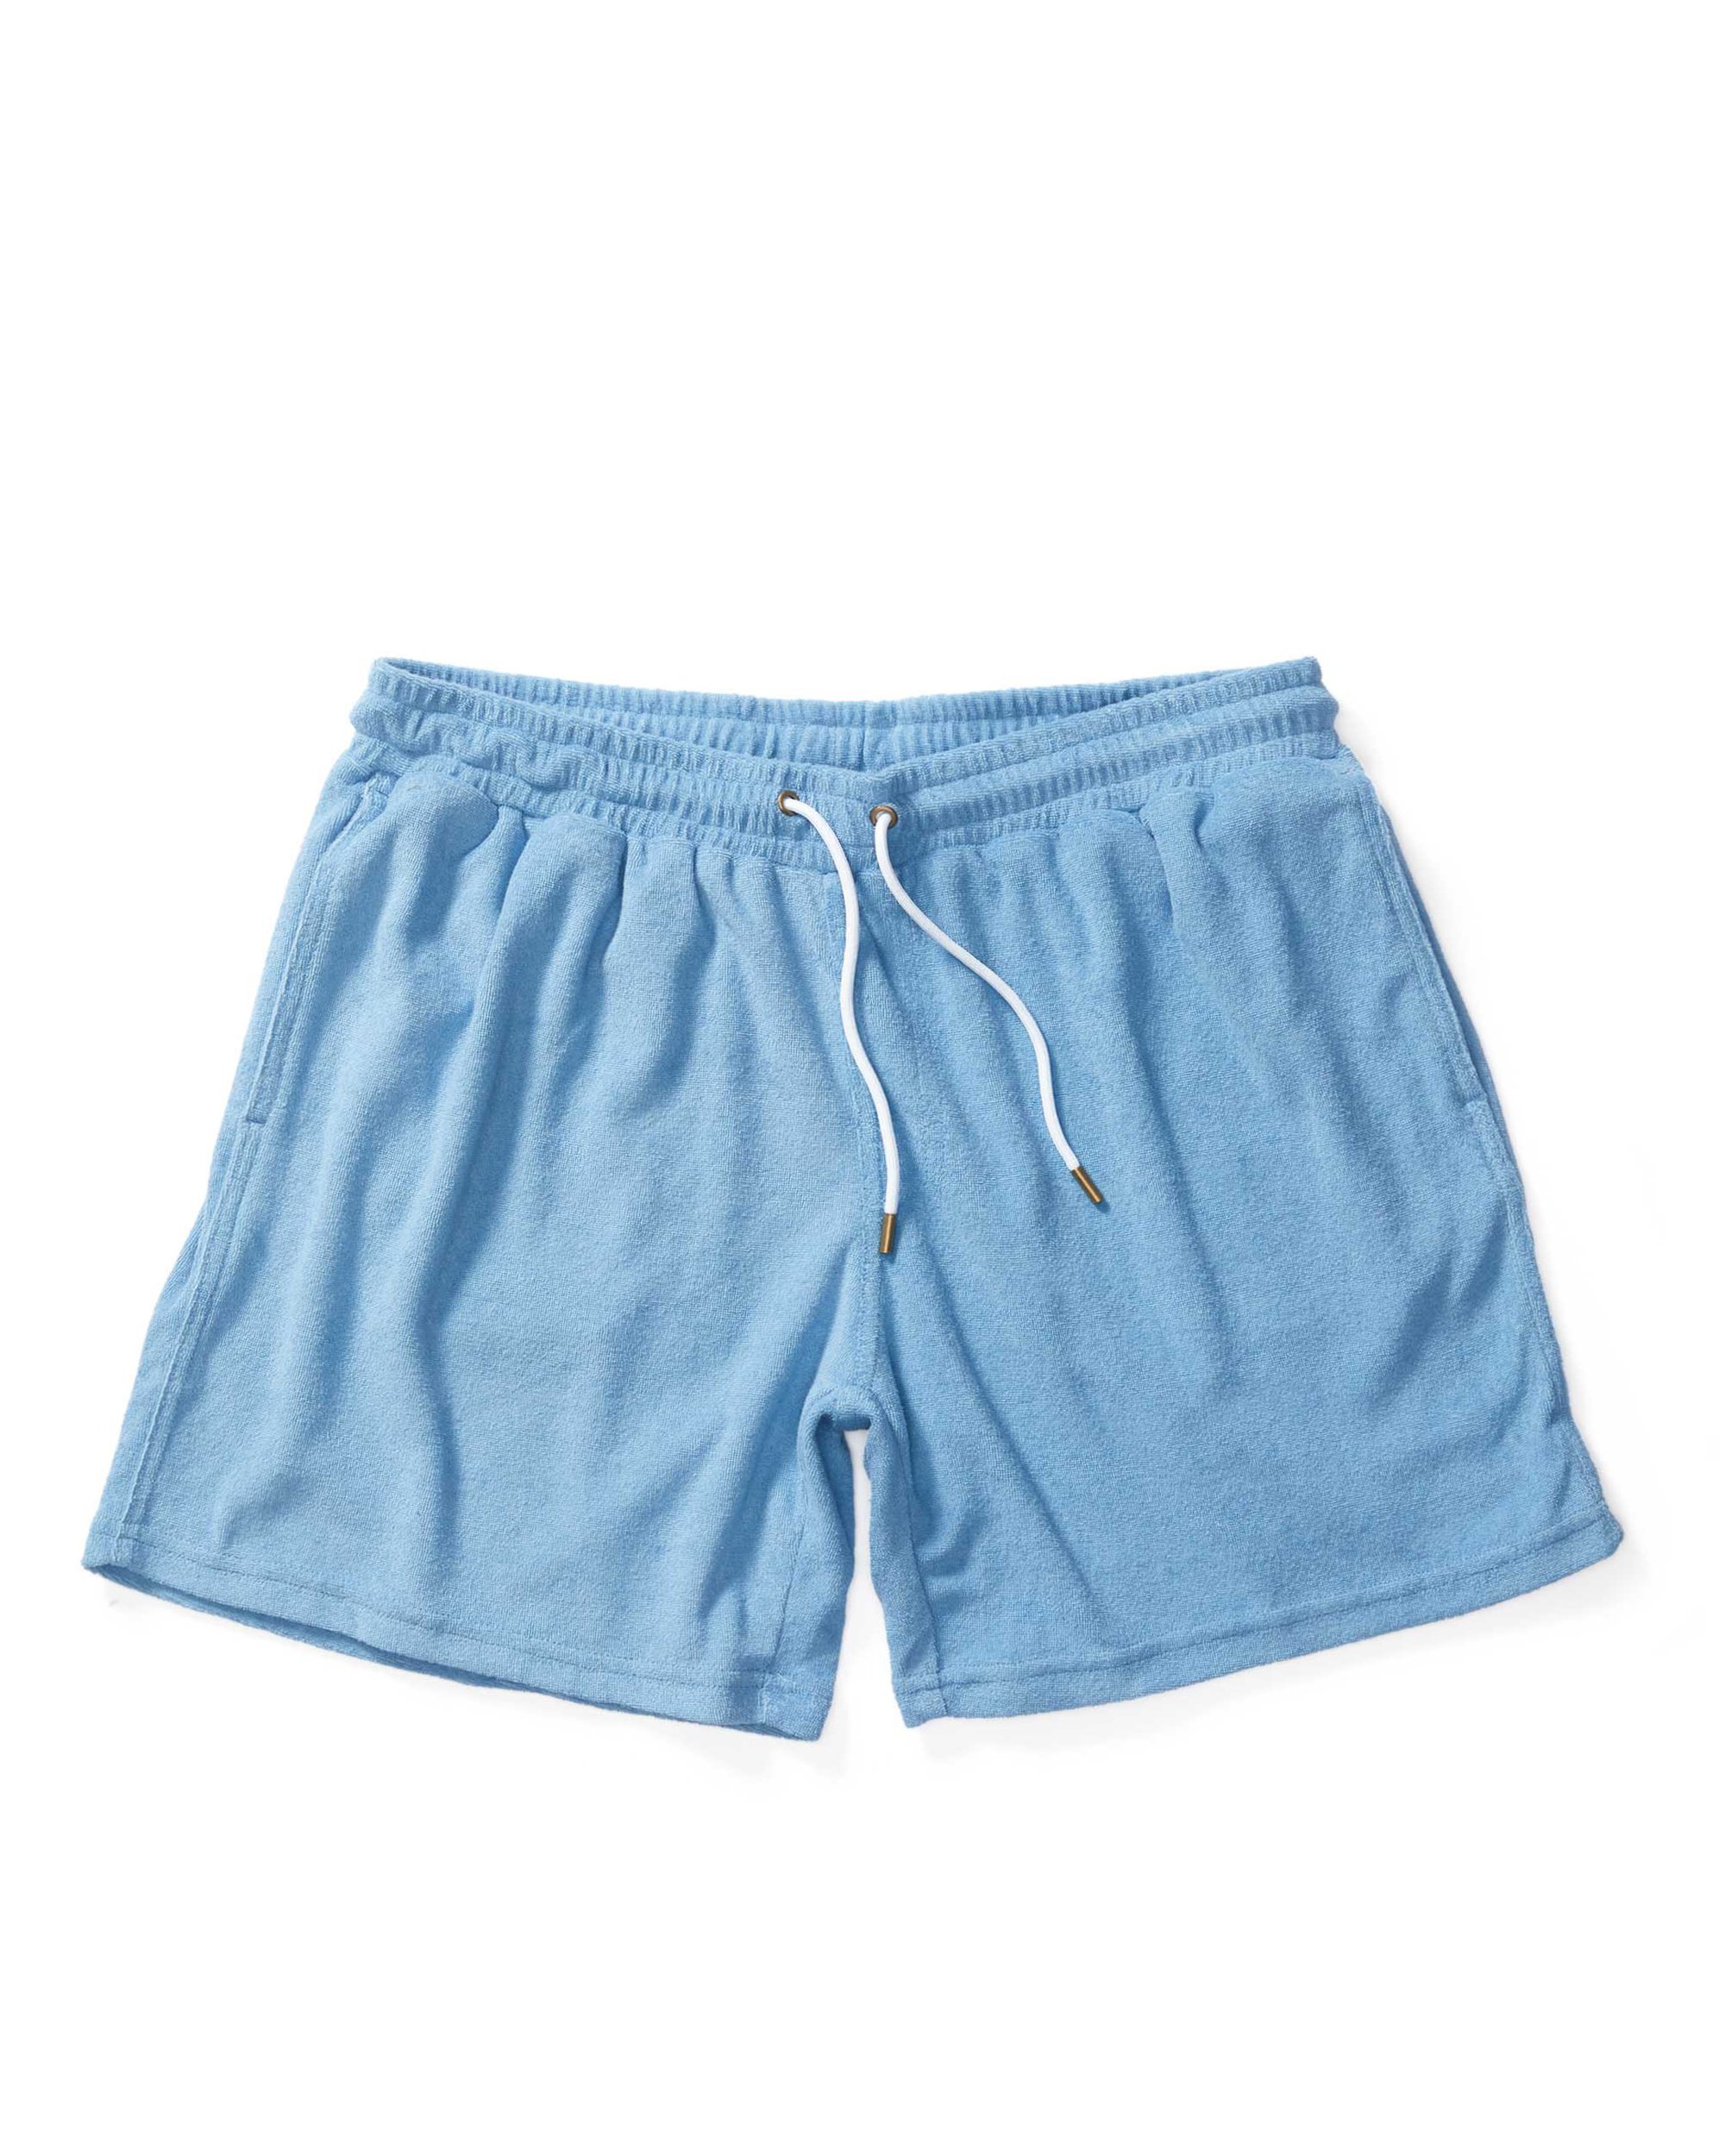 Image of The Tropez Terry Cloth Shorts - Soft Sky Blue